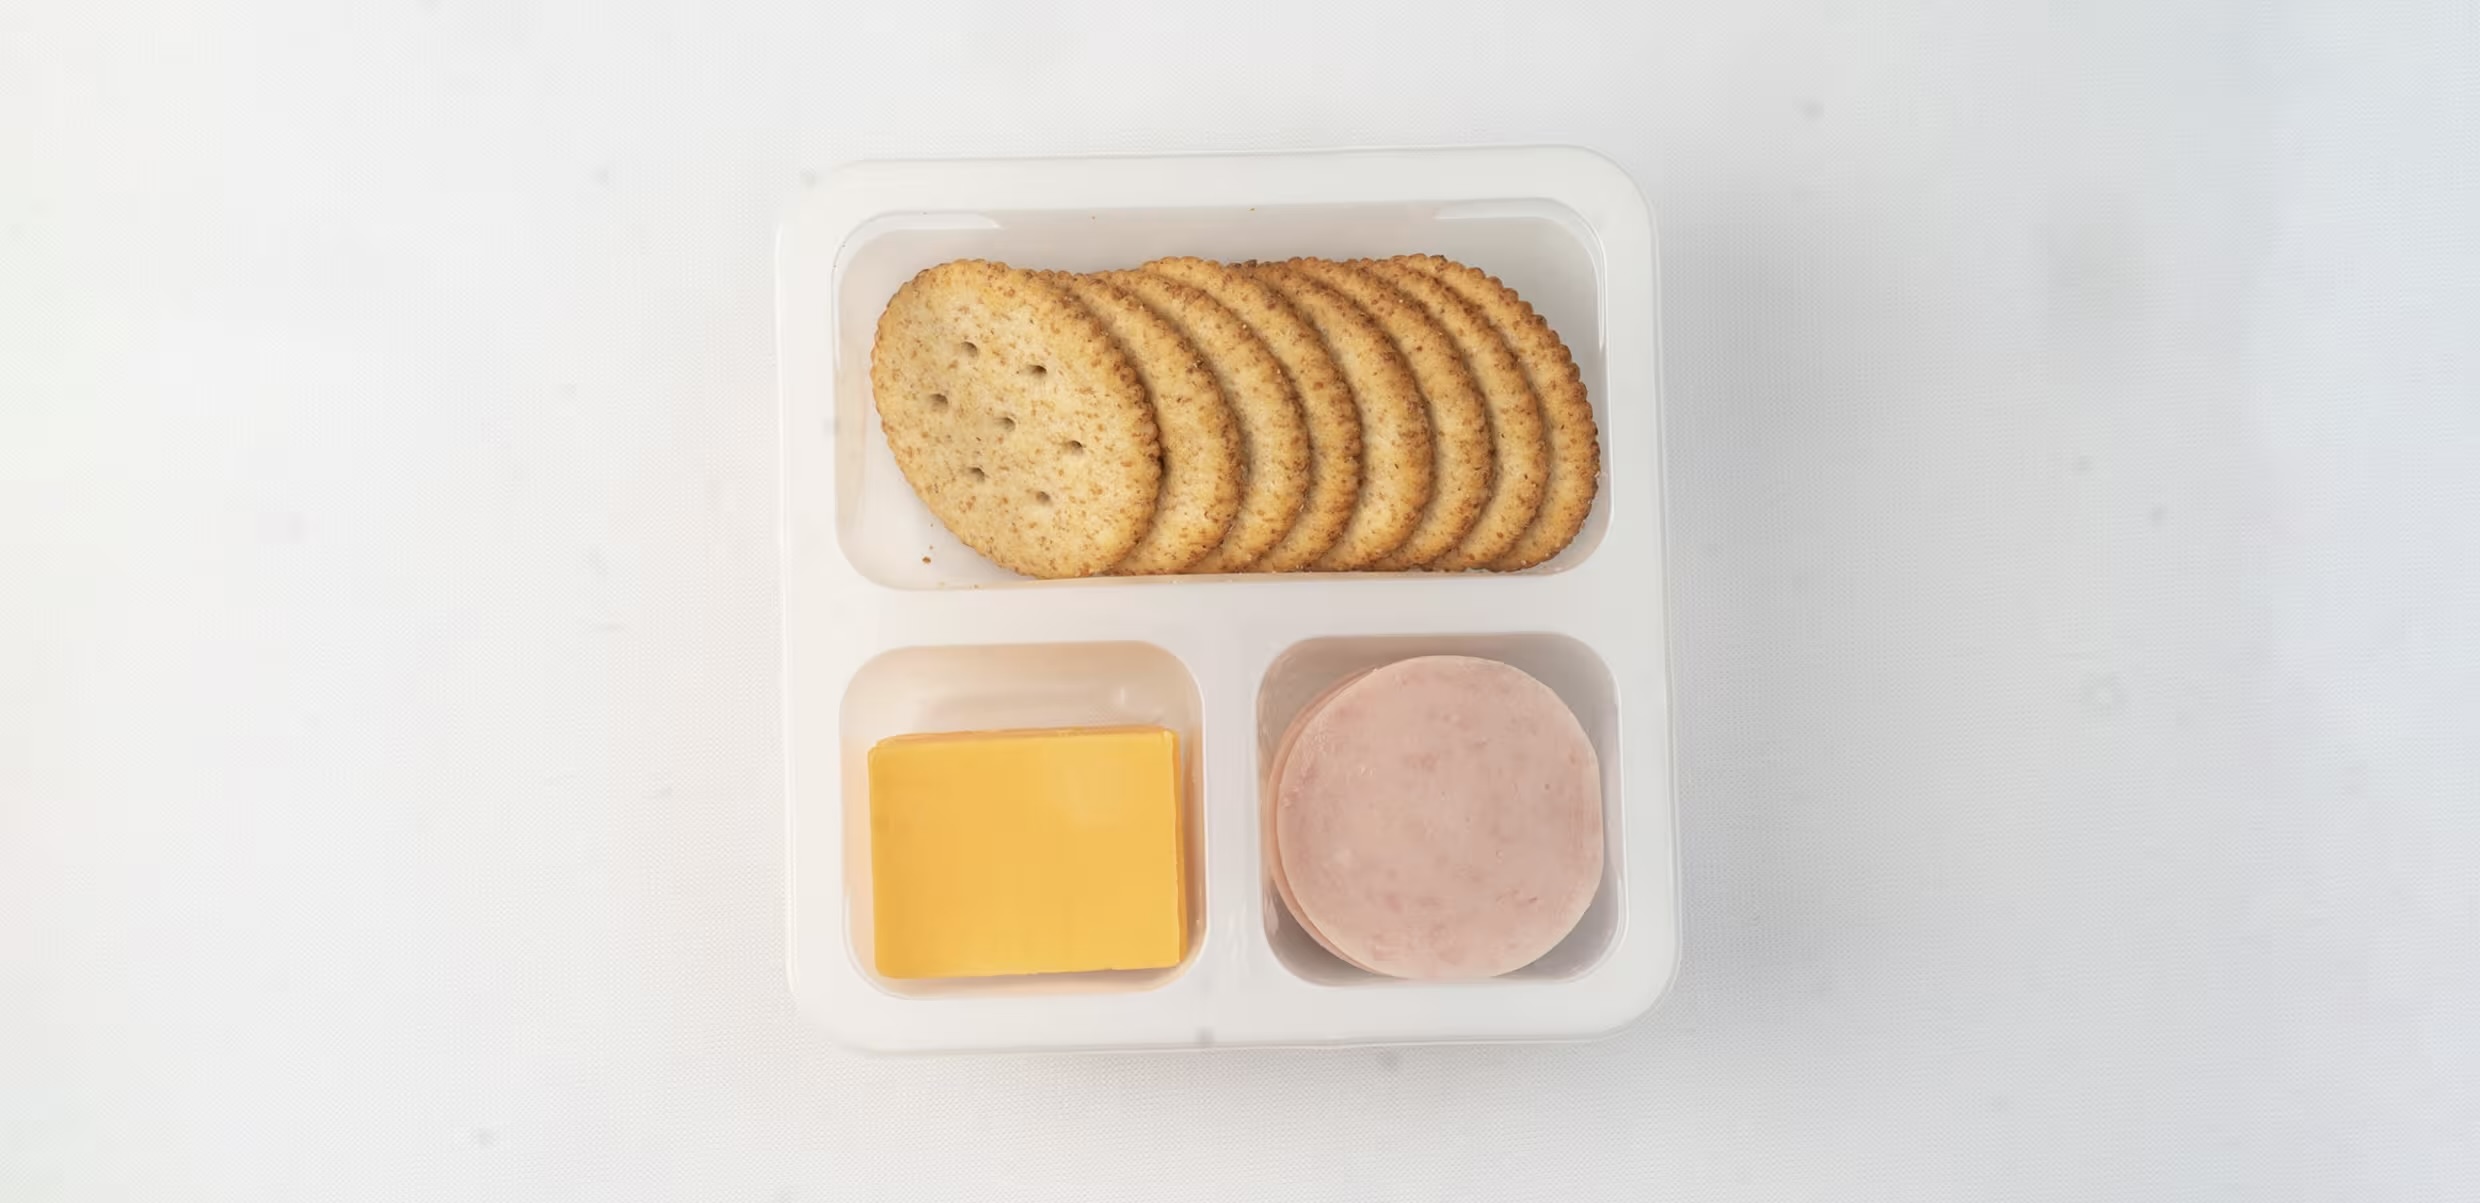 Say What Now? Kraft Heinz Sued Over Lunchables, Parents Claim High Levels Of Metal